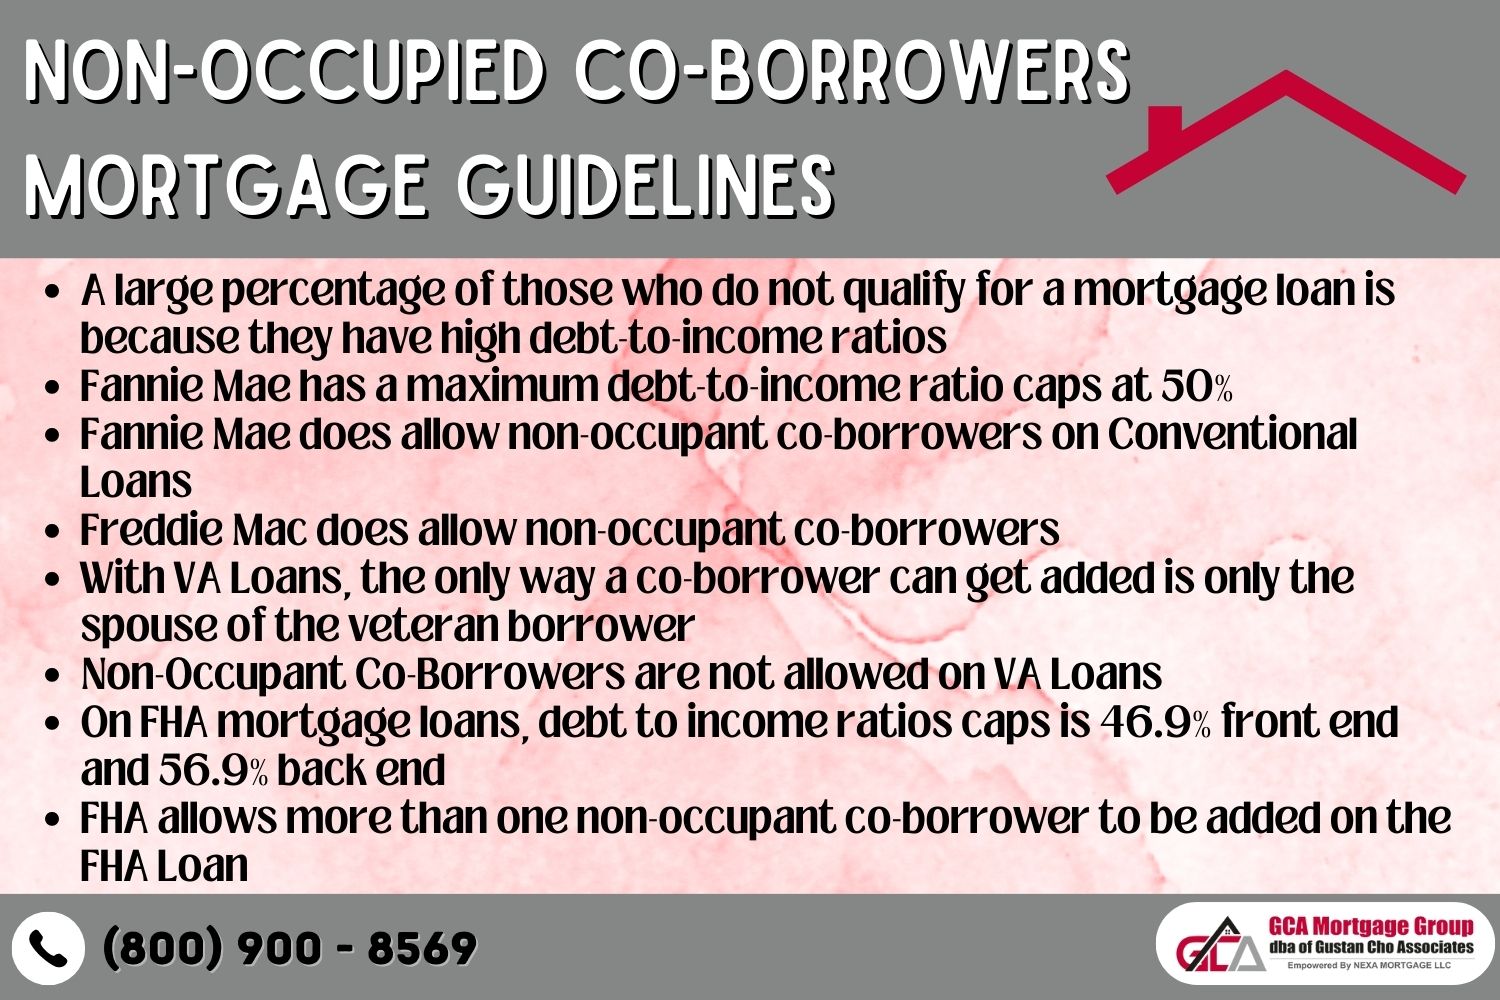 Non-Occupied Co-Borrowers Mortgage Guidelines